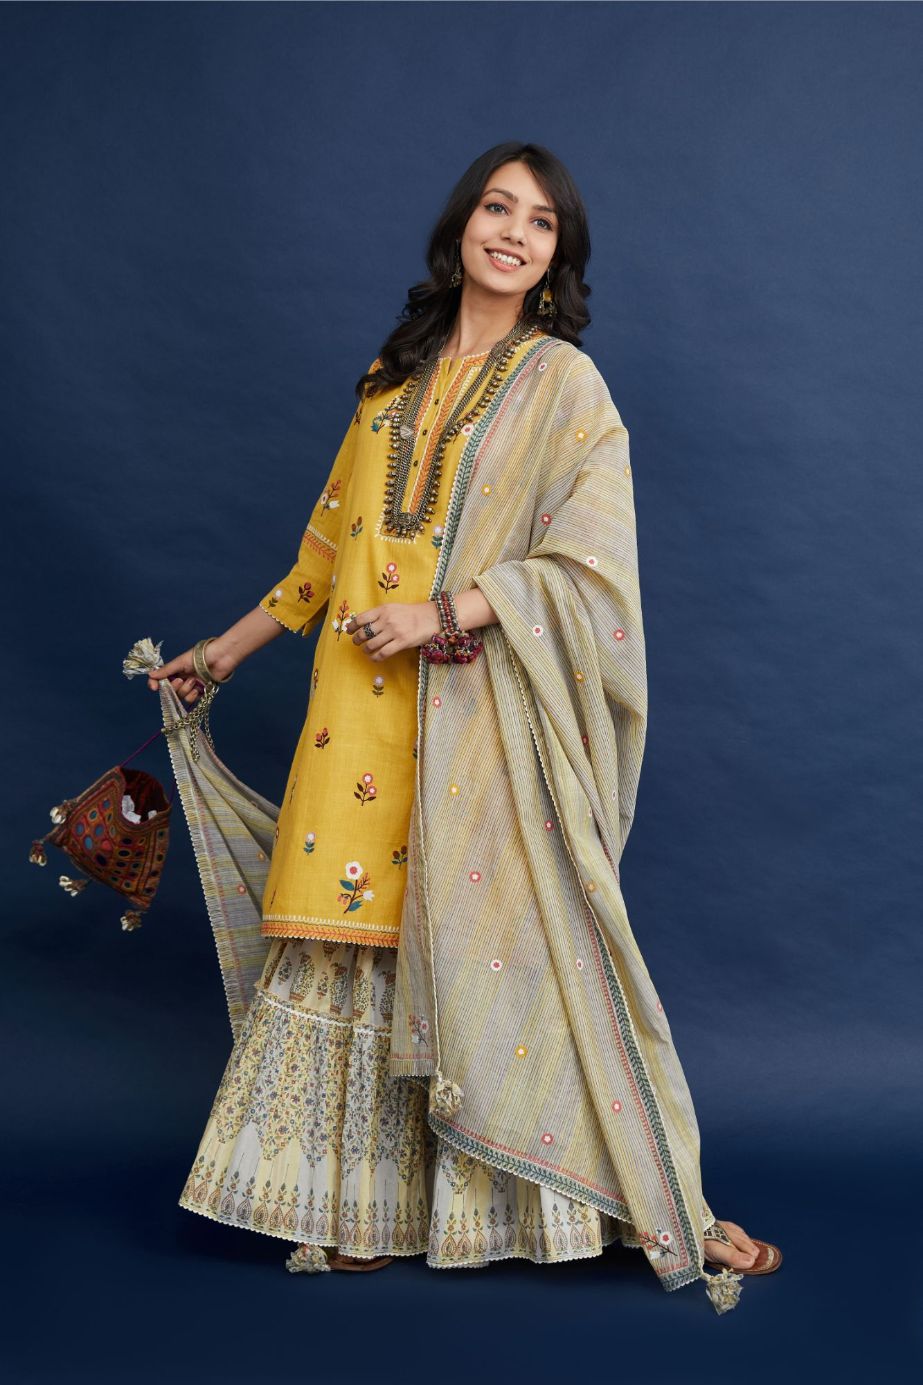 Short kurta set with all-over multi colored jaal embroidery, highlighted with ric-rac.